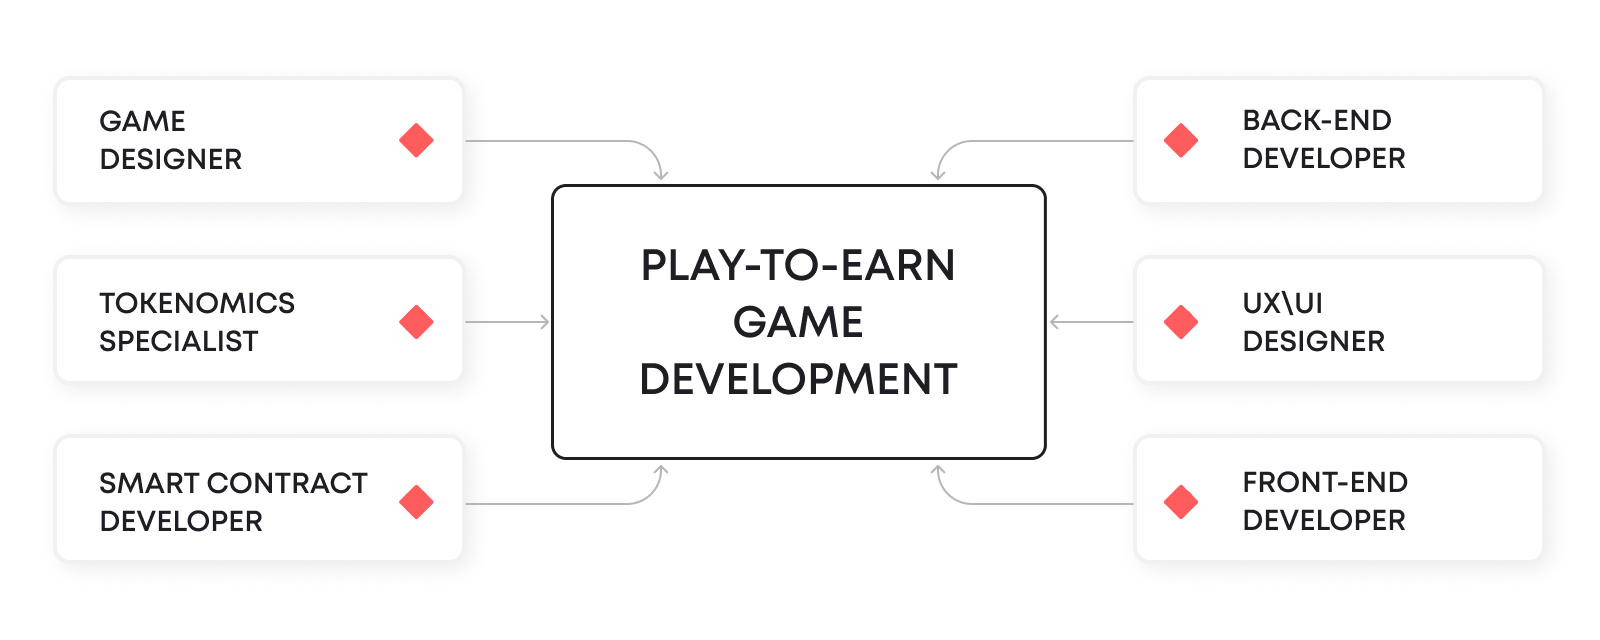 One of the crucial elements of P2E game development is a team of specialists in IT, development and blockchain industry